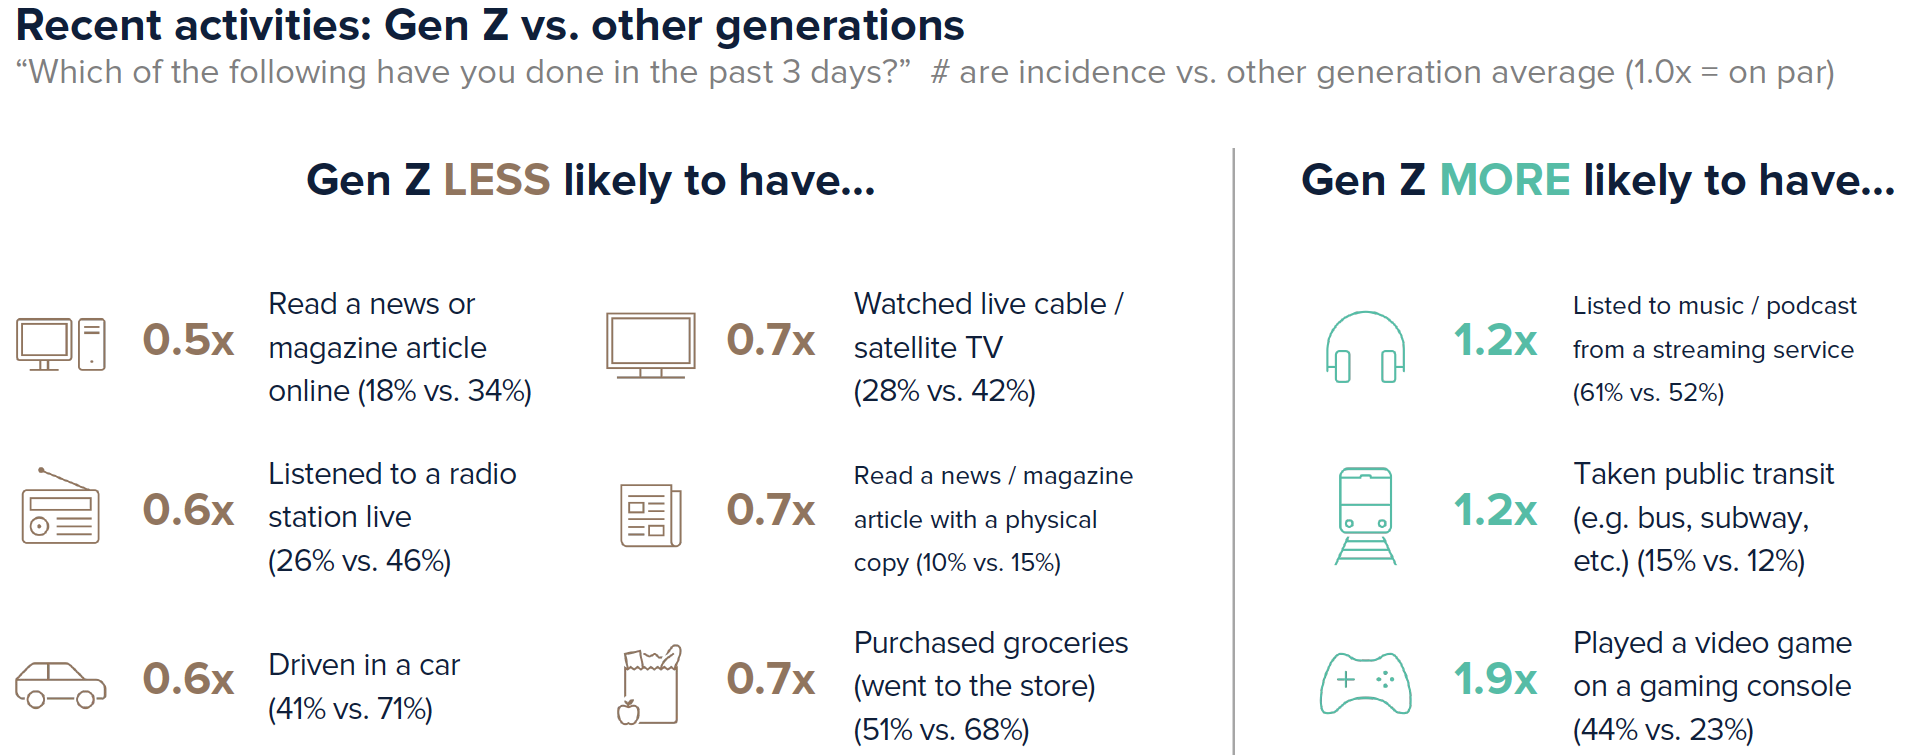 Recent activities: Gen Z vs other generations. “Which of the following have you done in the past 3 days?” Gen Z is less likely to have read a news or magazine article (18% vs 34%), driven in a car (41% vs 71%), watched live cable / satellite TV (28% vs 42%). Gen Z is more likely to have listen to music / podcast from streaming service (61% vs 52%), taken public transit (15% vs 12%), and played a video game on a gaming console (44% vs 23%)